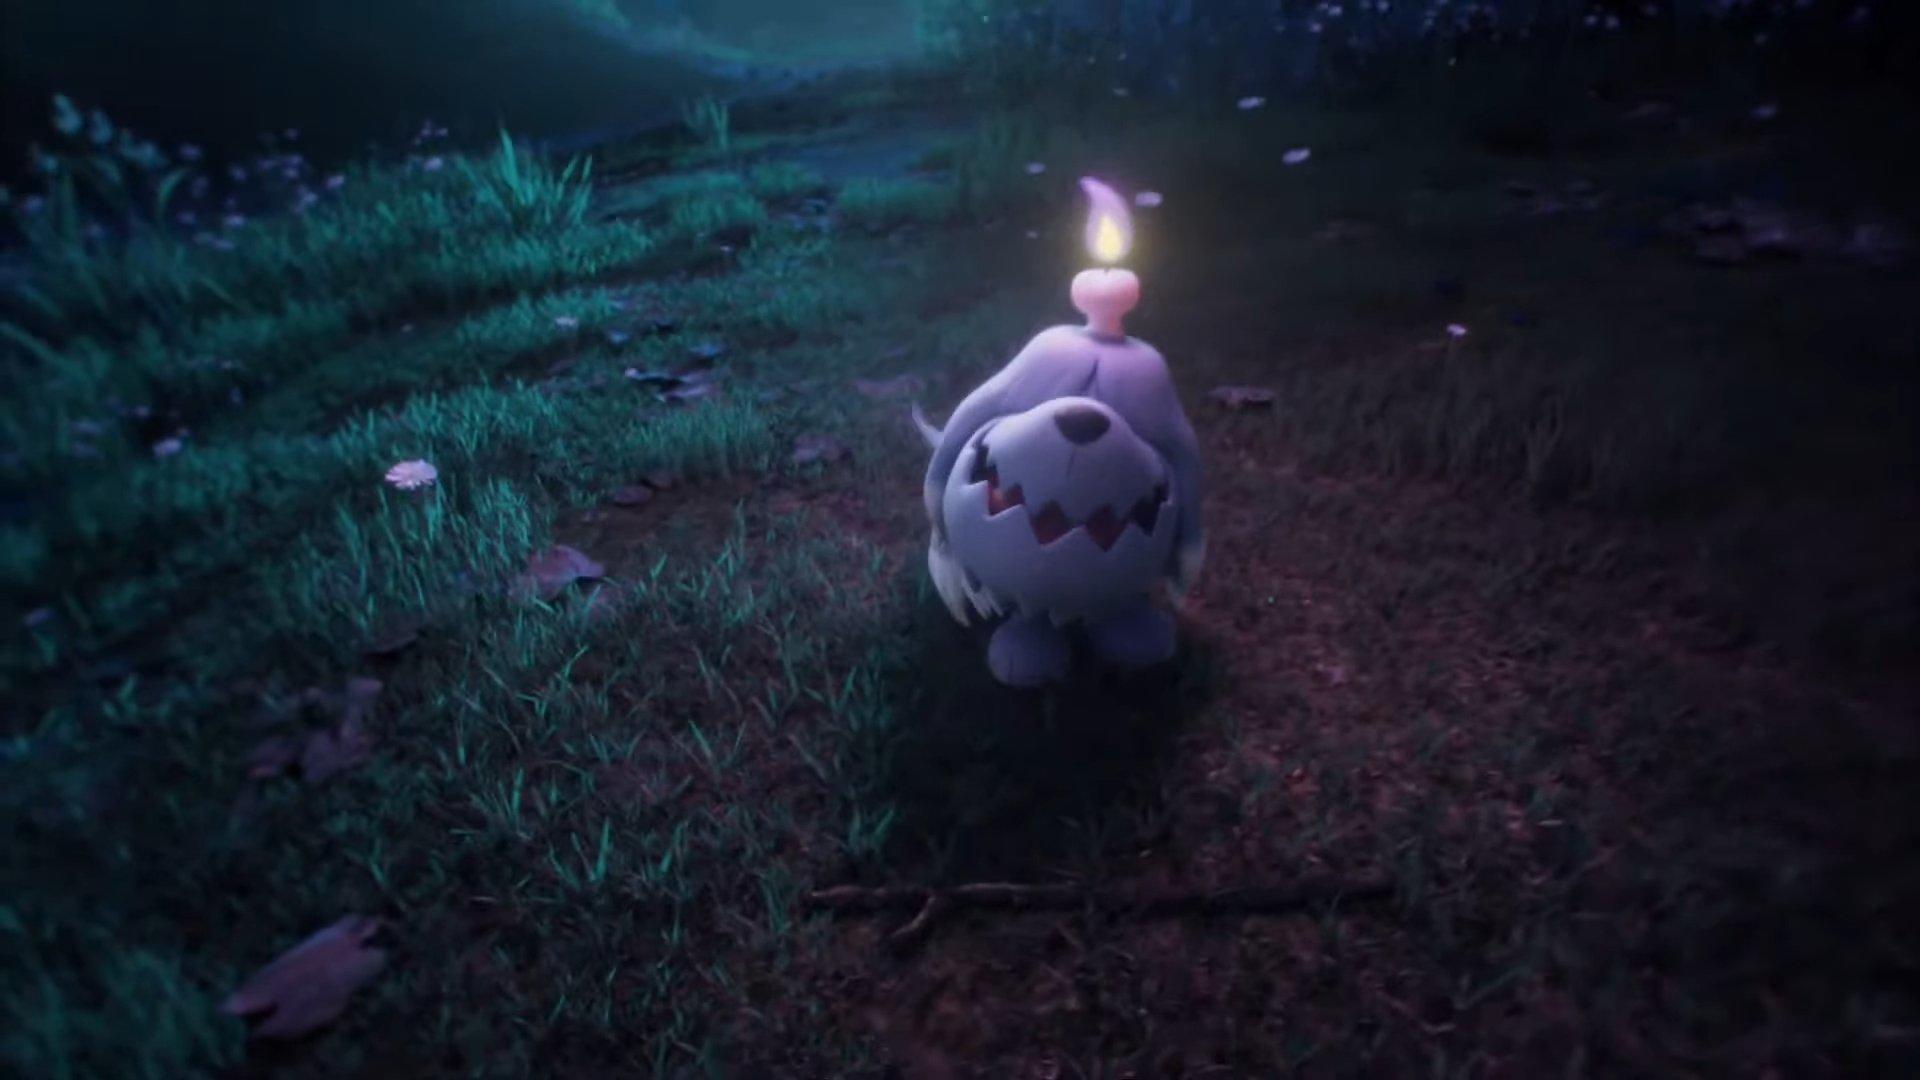 Pokemon Scarlet and Violet reveal new Ghost-type Pokemon